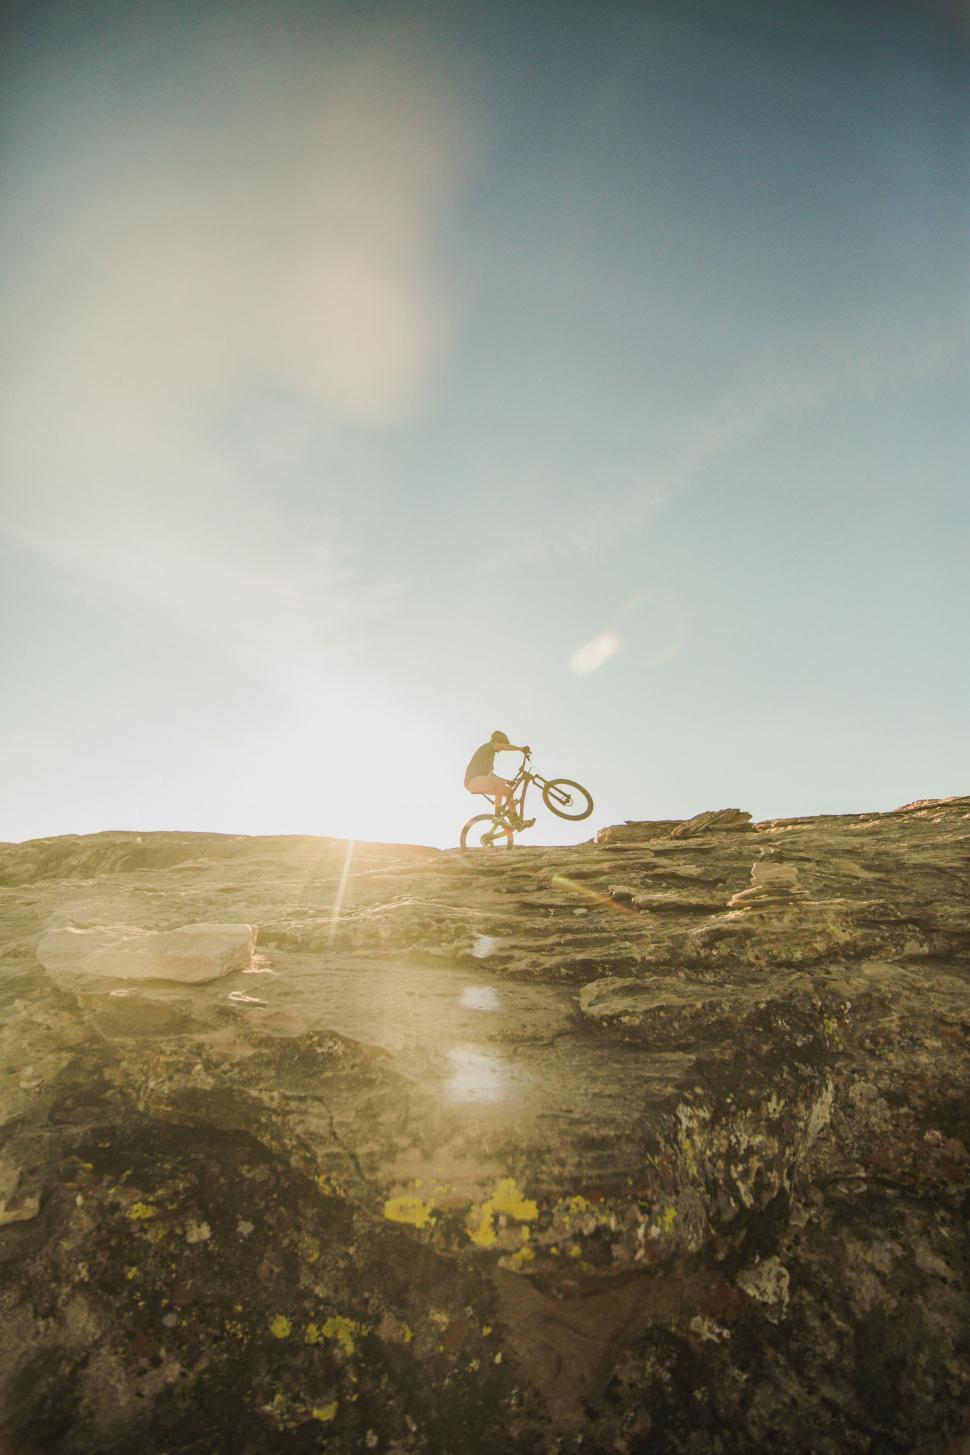 Free Image of Man Riding Bike on Top of Hill 